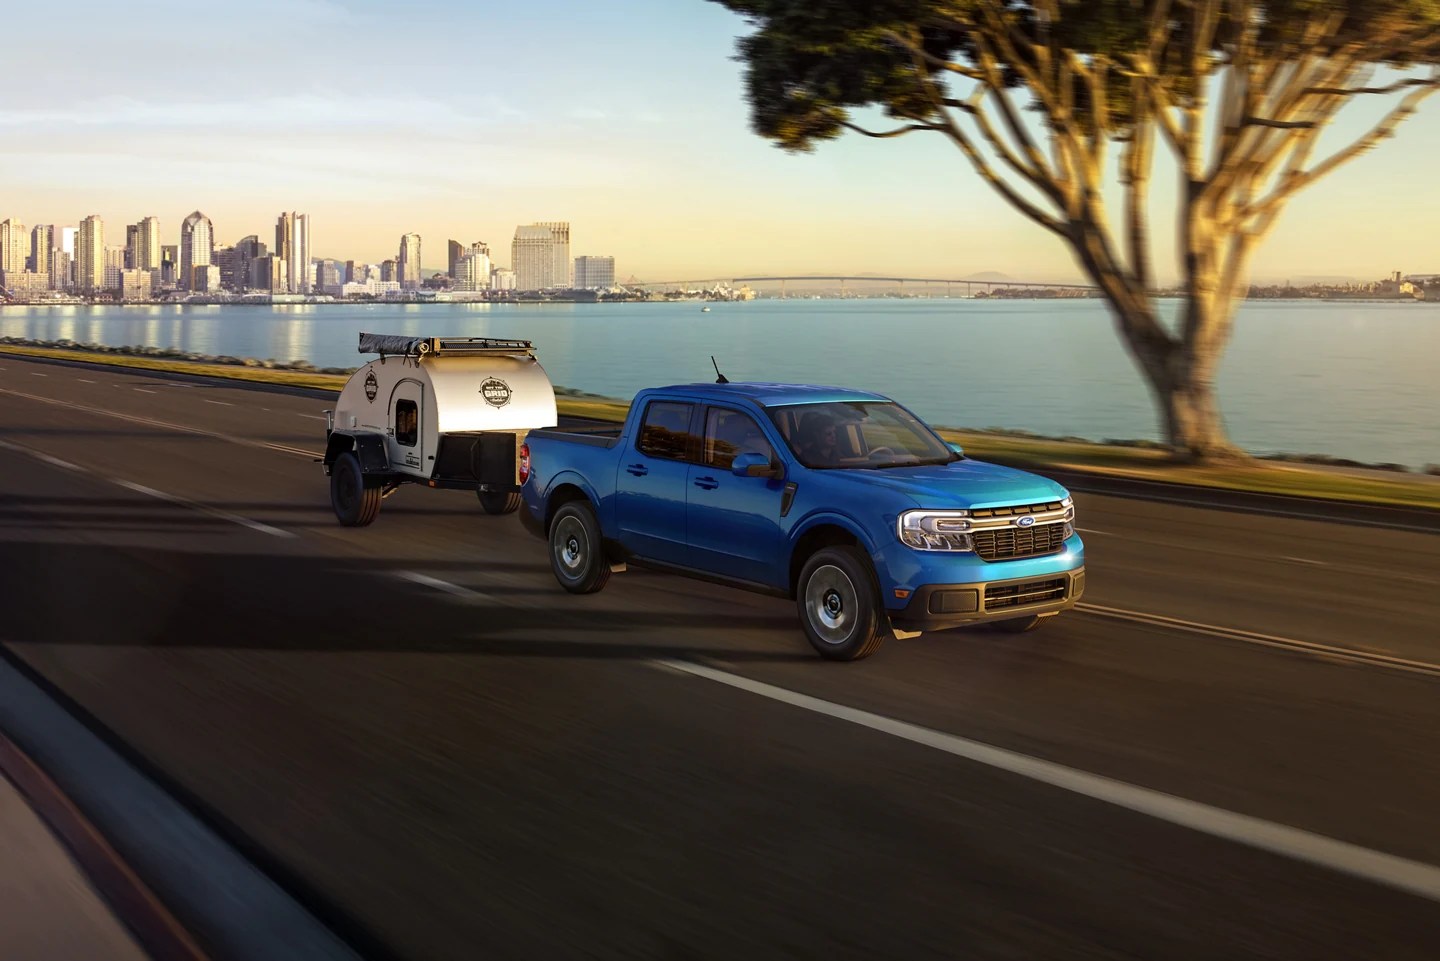 A blue 2022 Ford Maverick navigates a waterfront road in front of an urban environment.